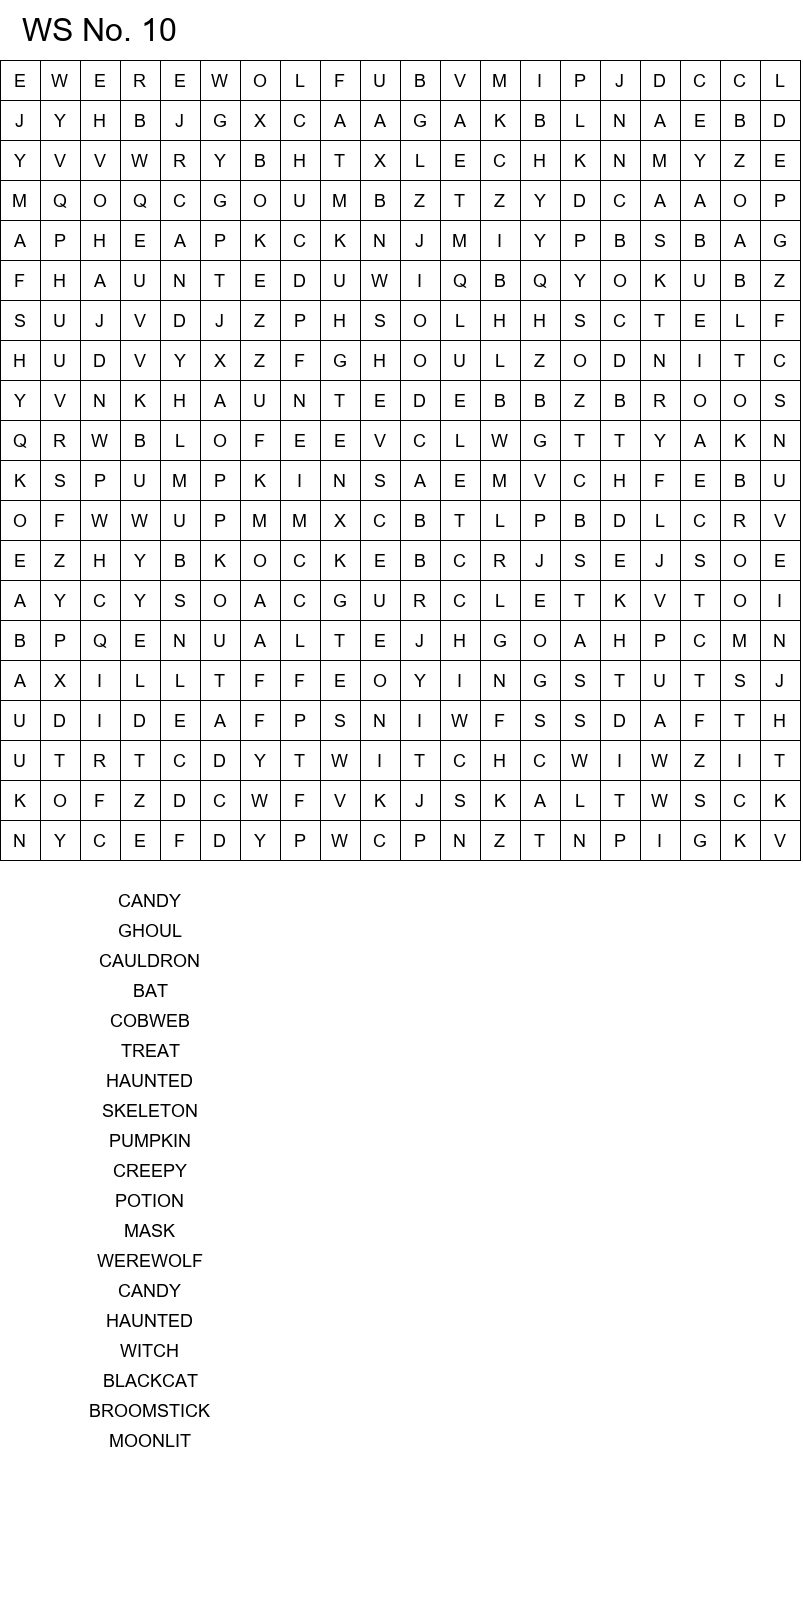 Challenging Halloween word search for teens size 20x20 No 10